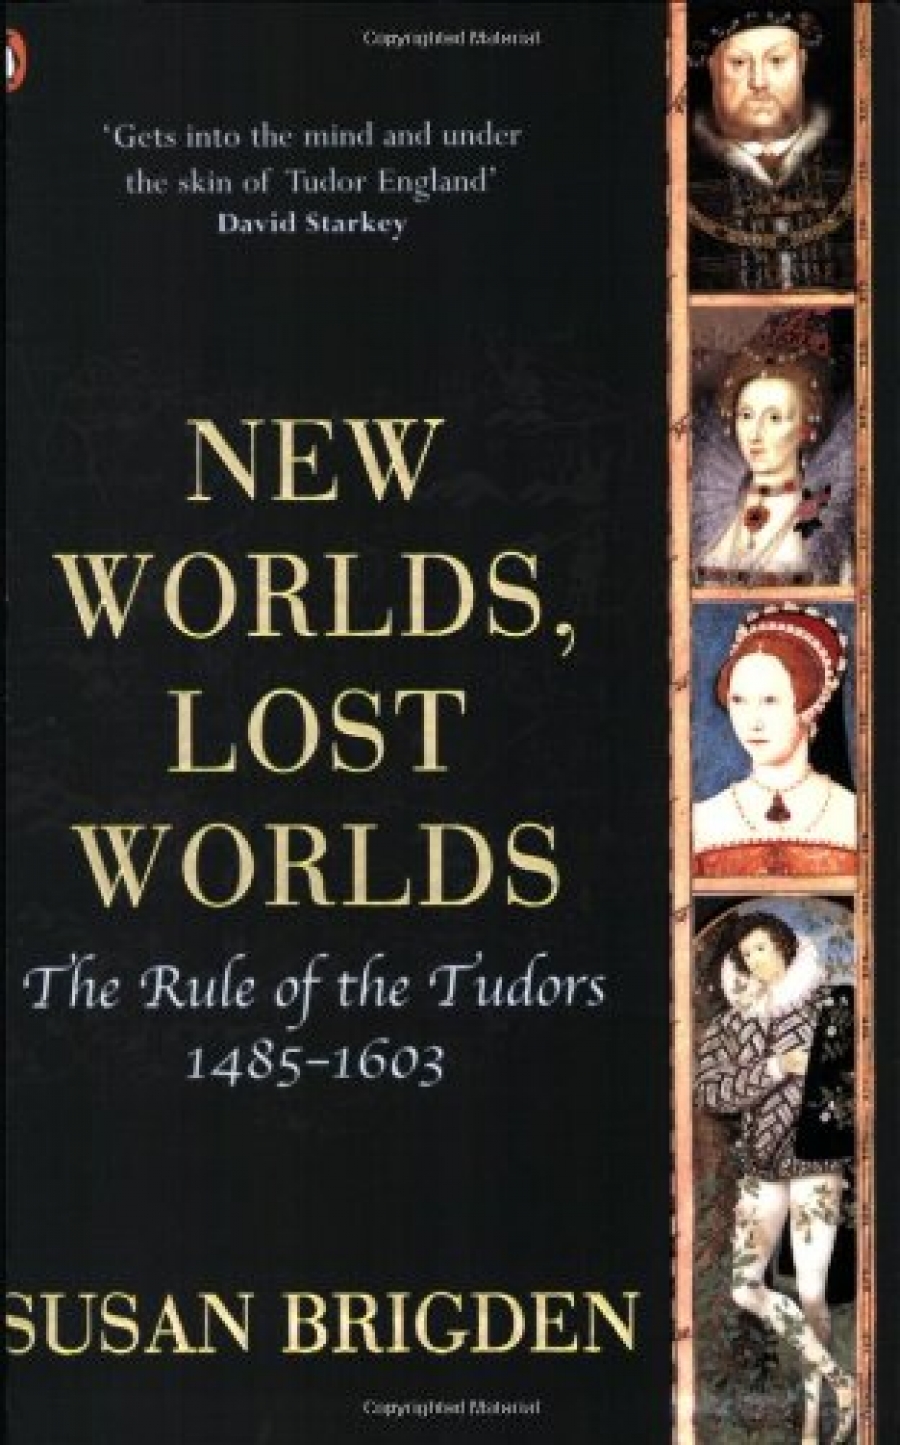 Brigden, Susan Penguin History of Britain: New Worlds, Lost Worlds: The Rule of the Tudors 1485-1603 